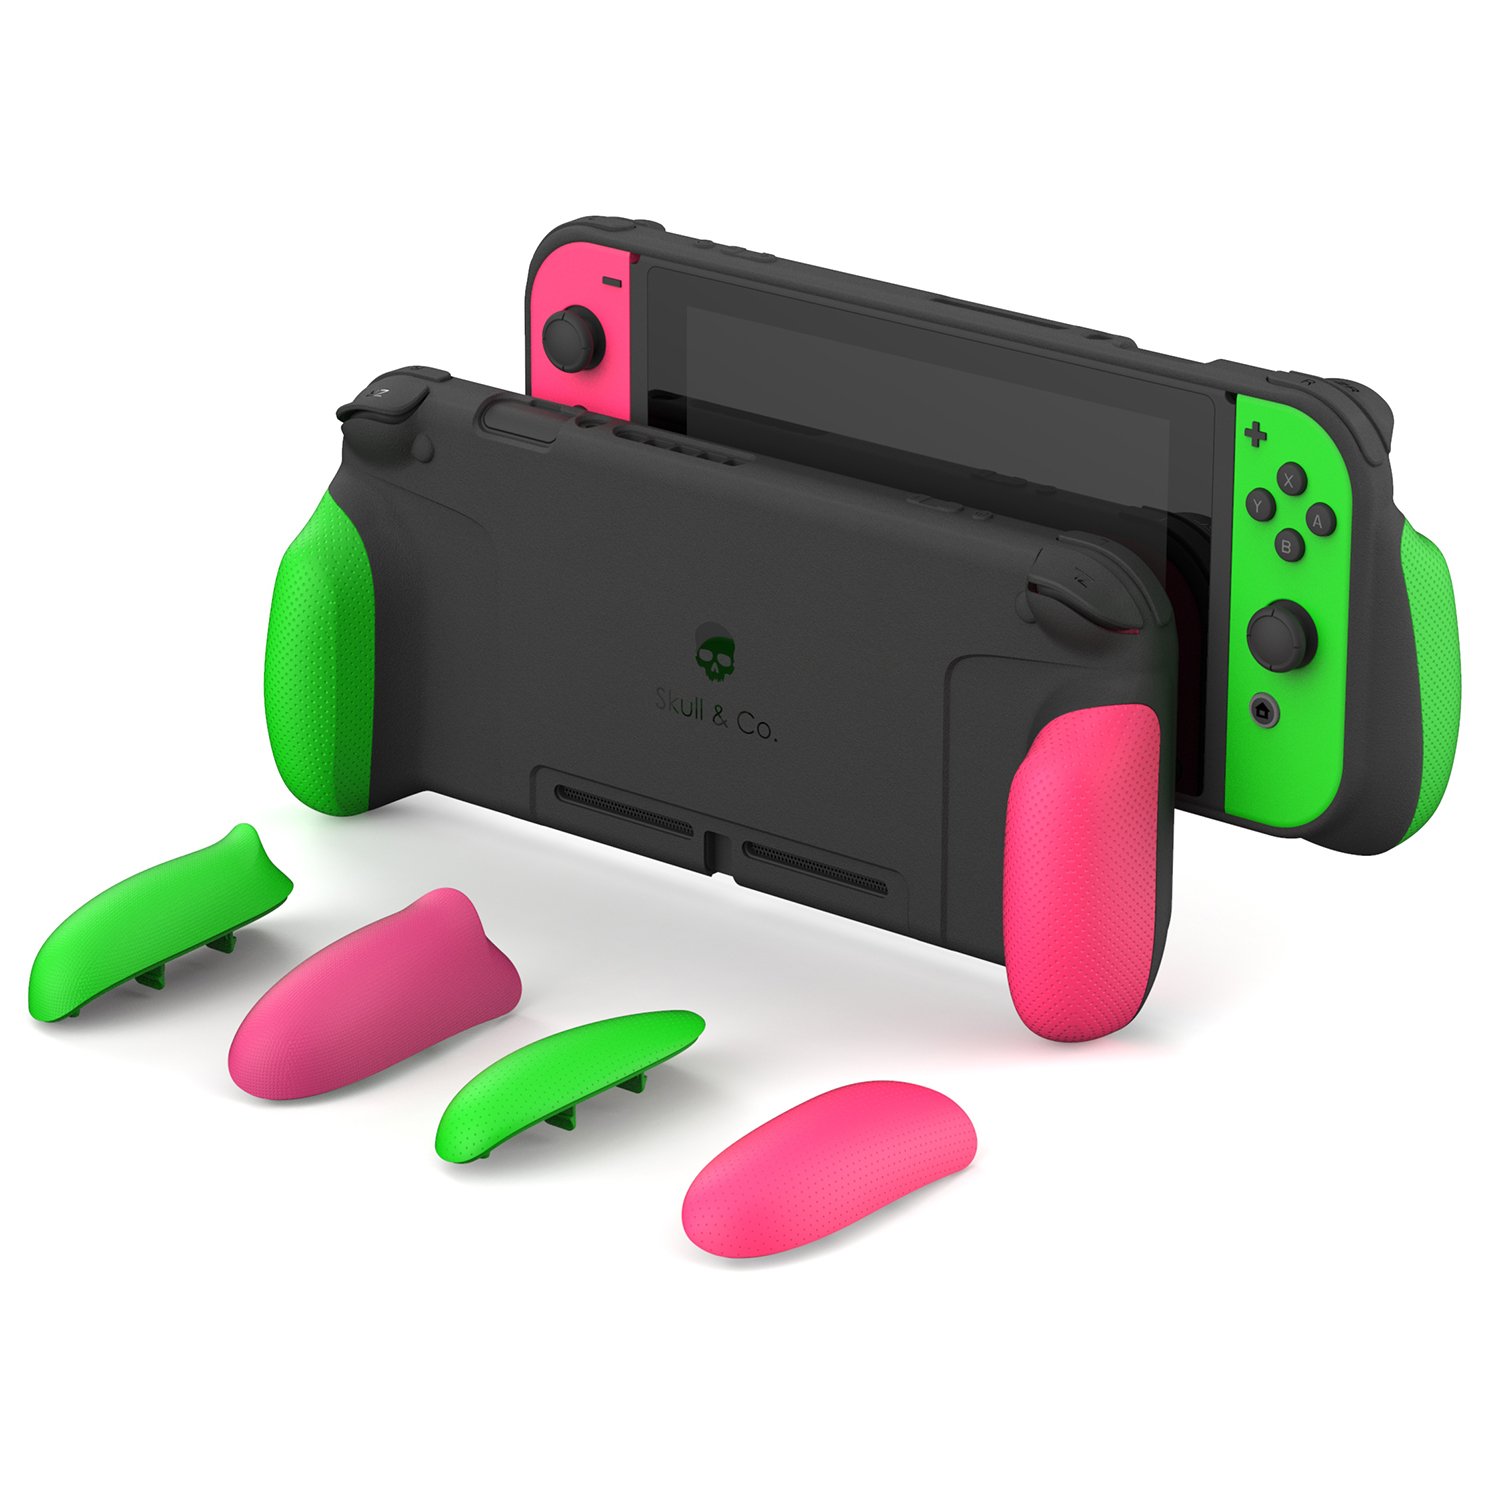 Gaming Accessories, GripCase, GripCase For Nintendo SWITCH, Nintendo Switch Review, Rating 9/10, Skull & Co, Switch Review